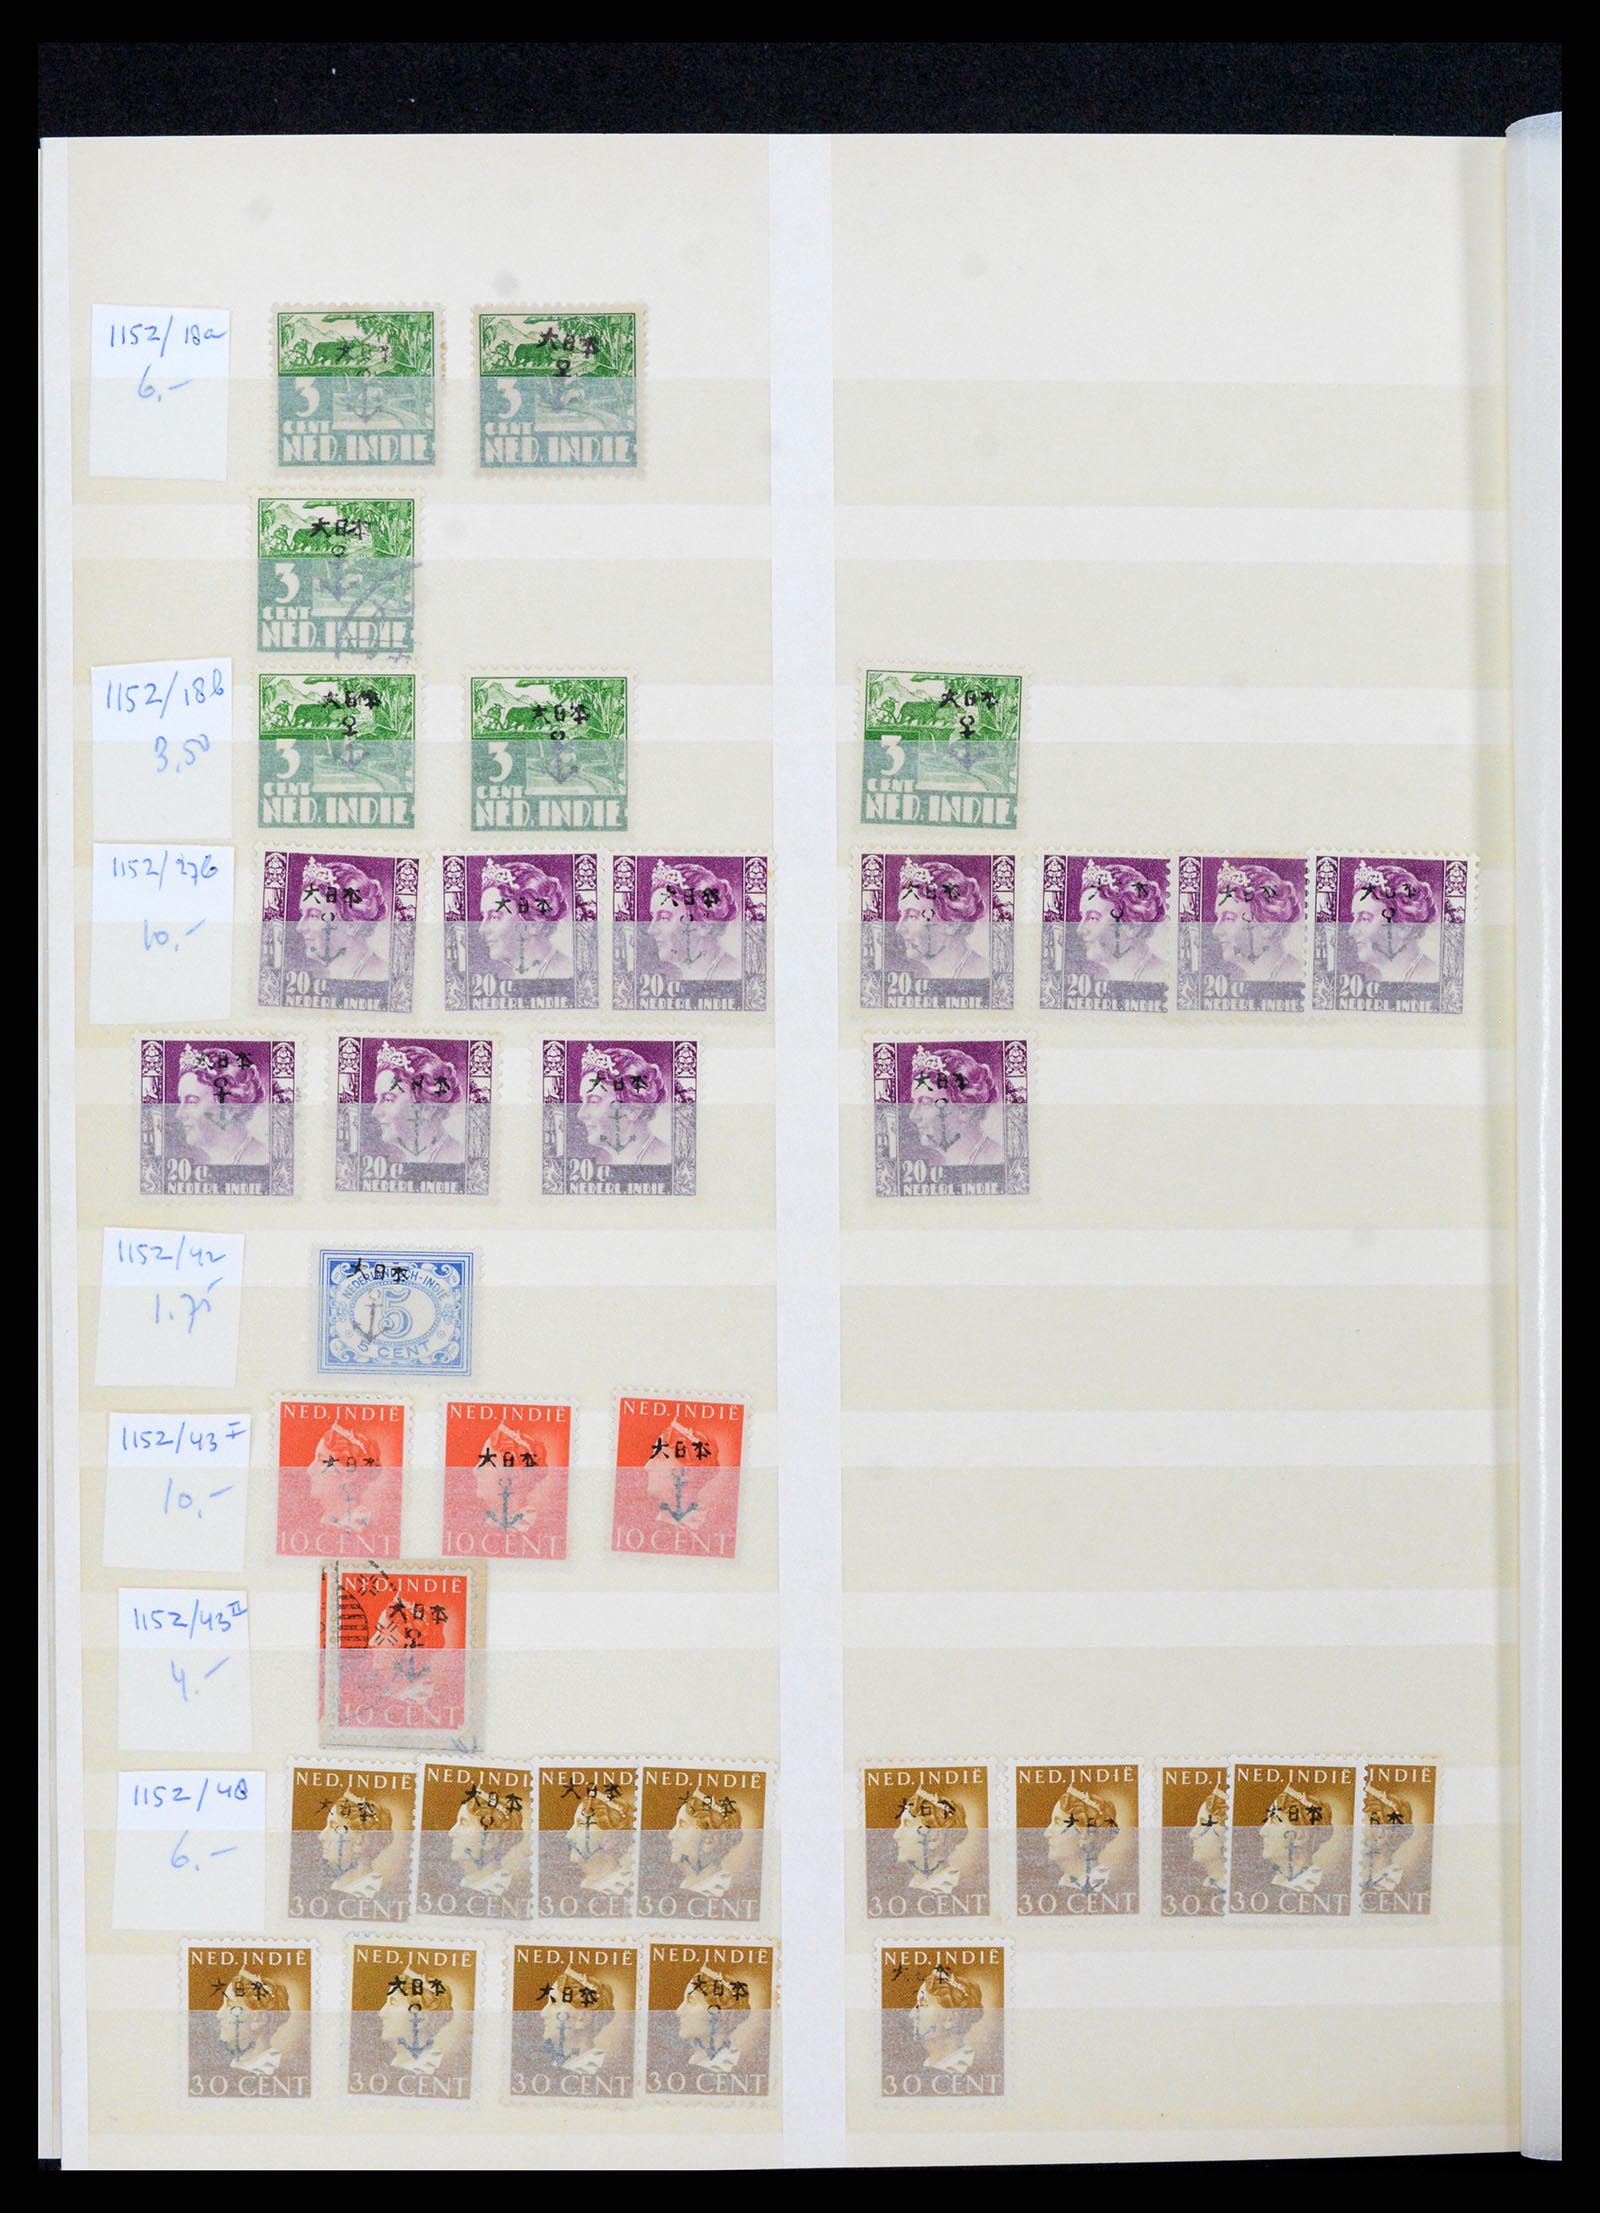 37429 022 - Stamp collection 37429 Japanese occupation Dutch East Indies 1942-1945.